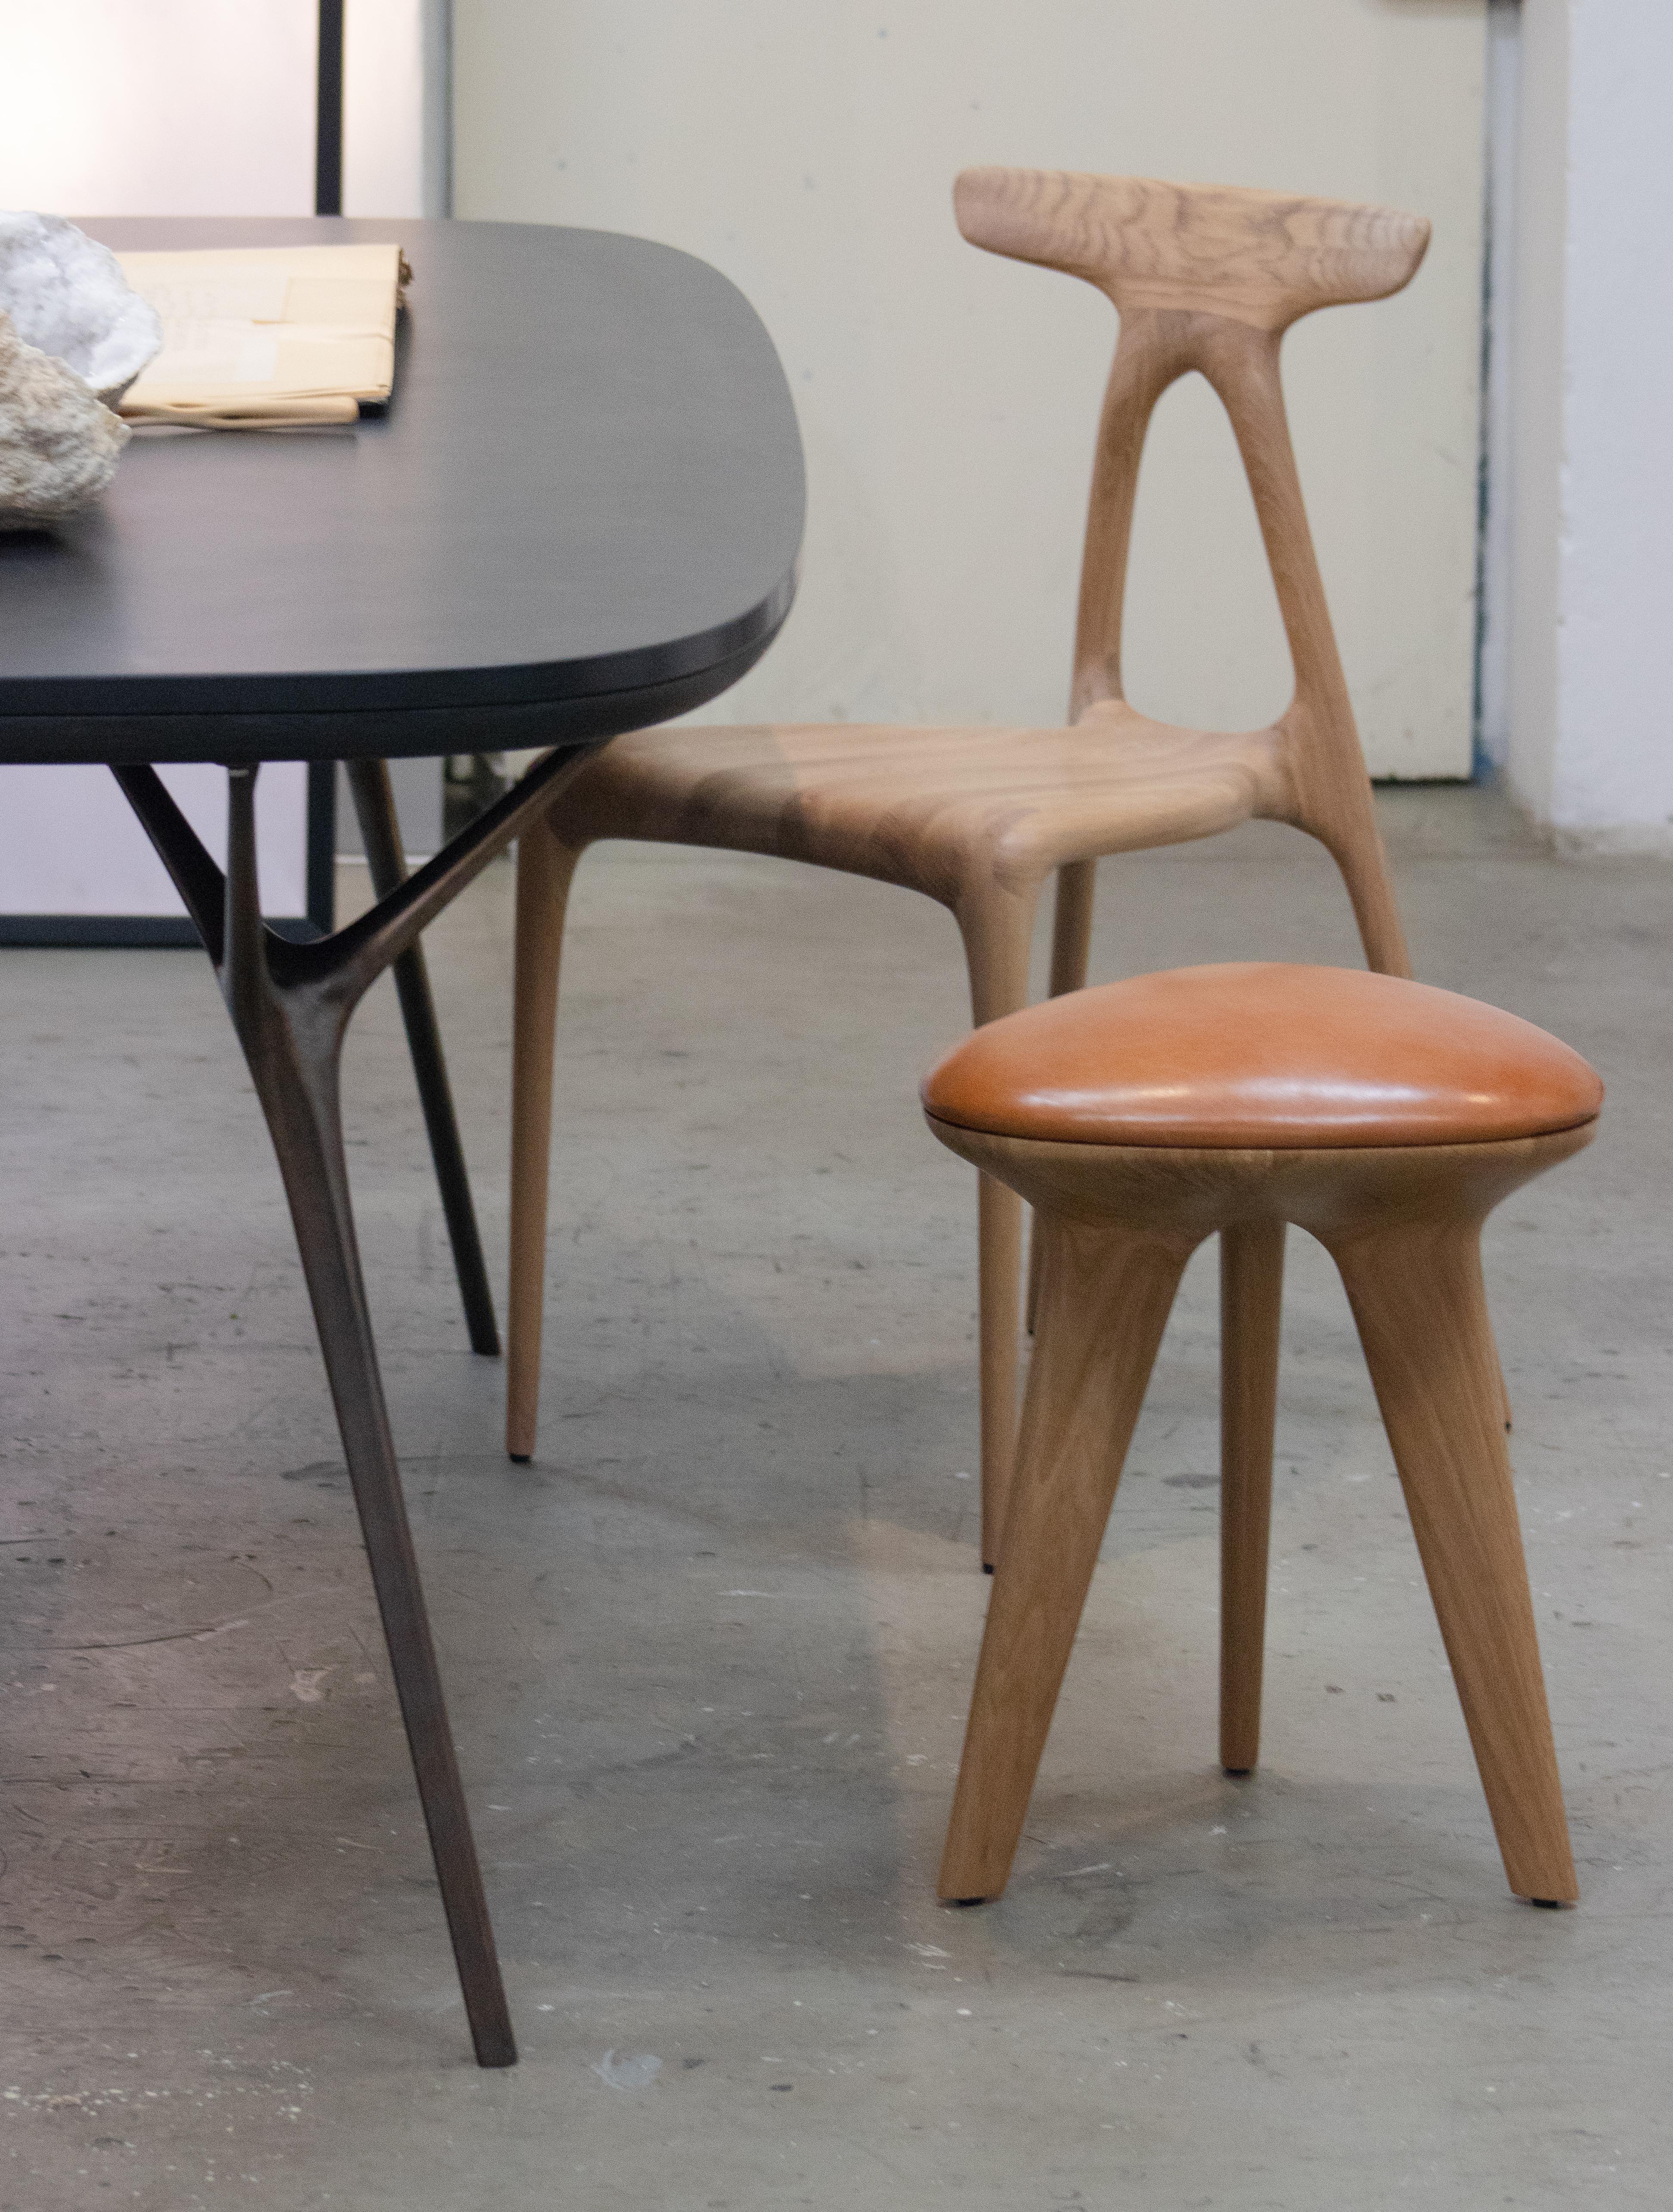 Minimalist Rotor, Solid Oak Stool with Padded Tan Leather Seat by Made in Ratio For Sale